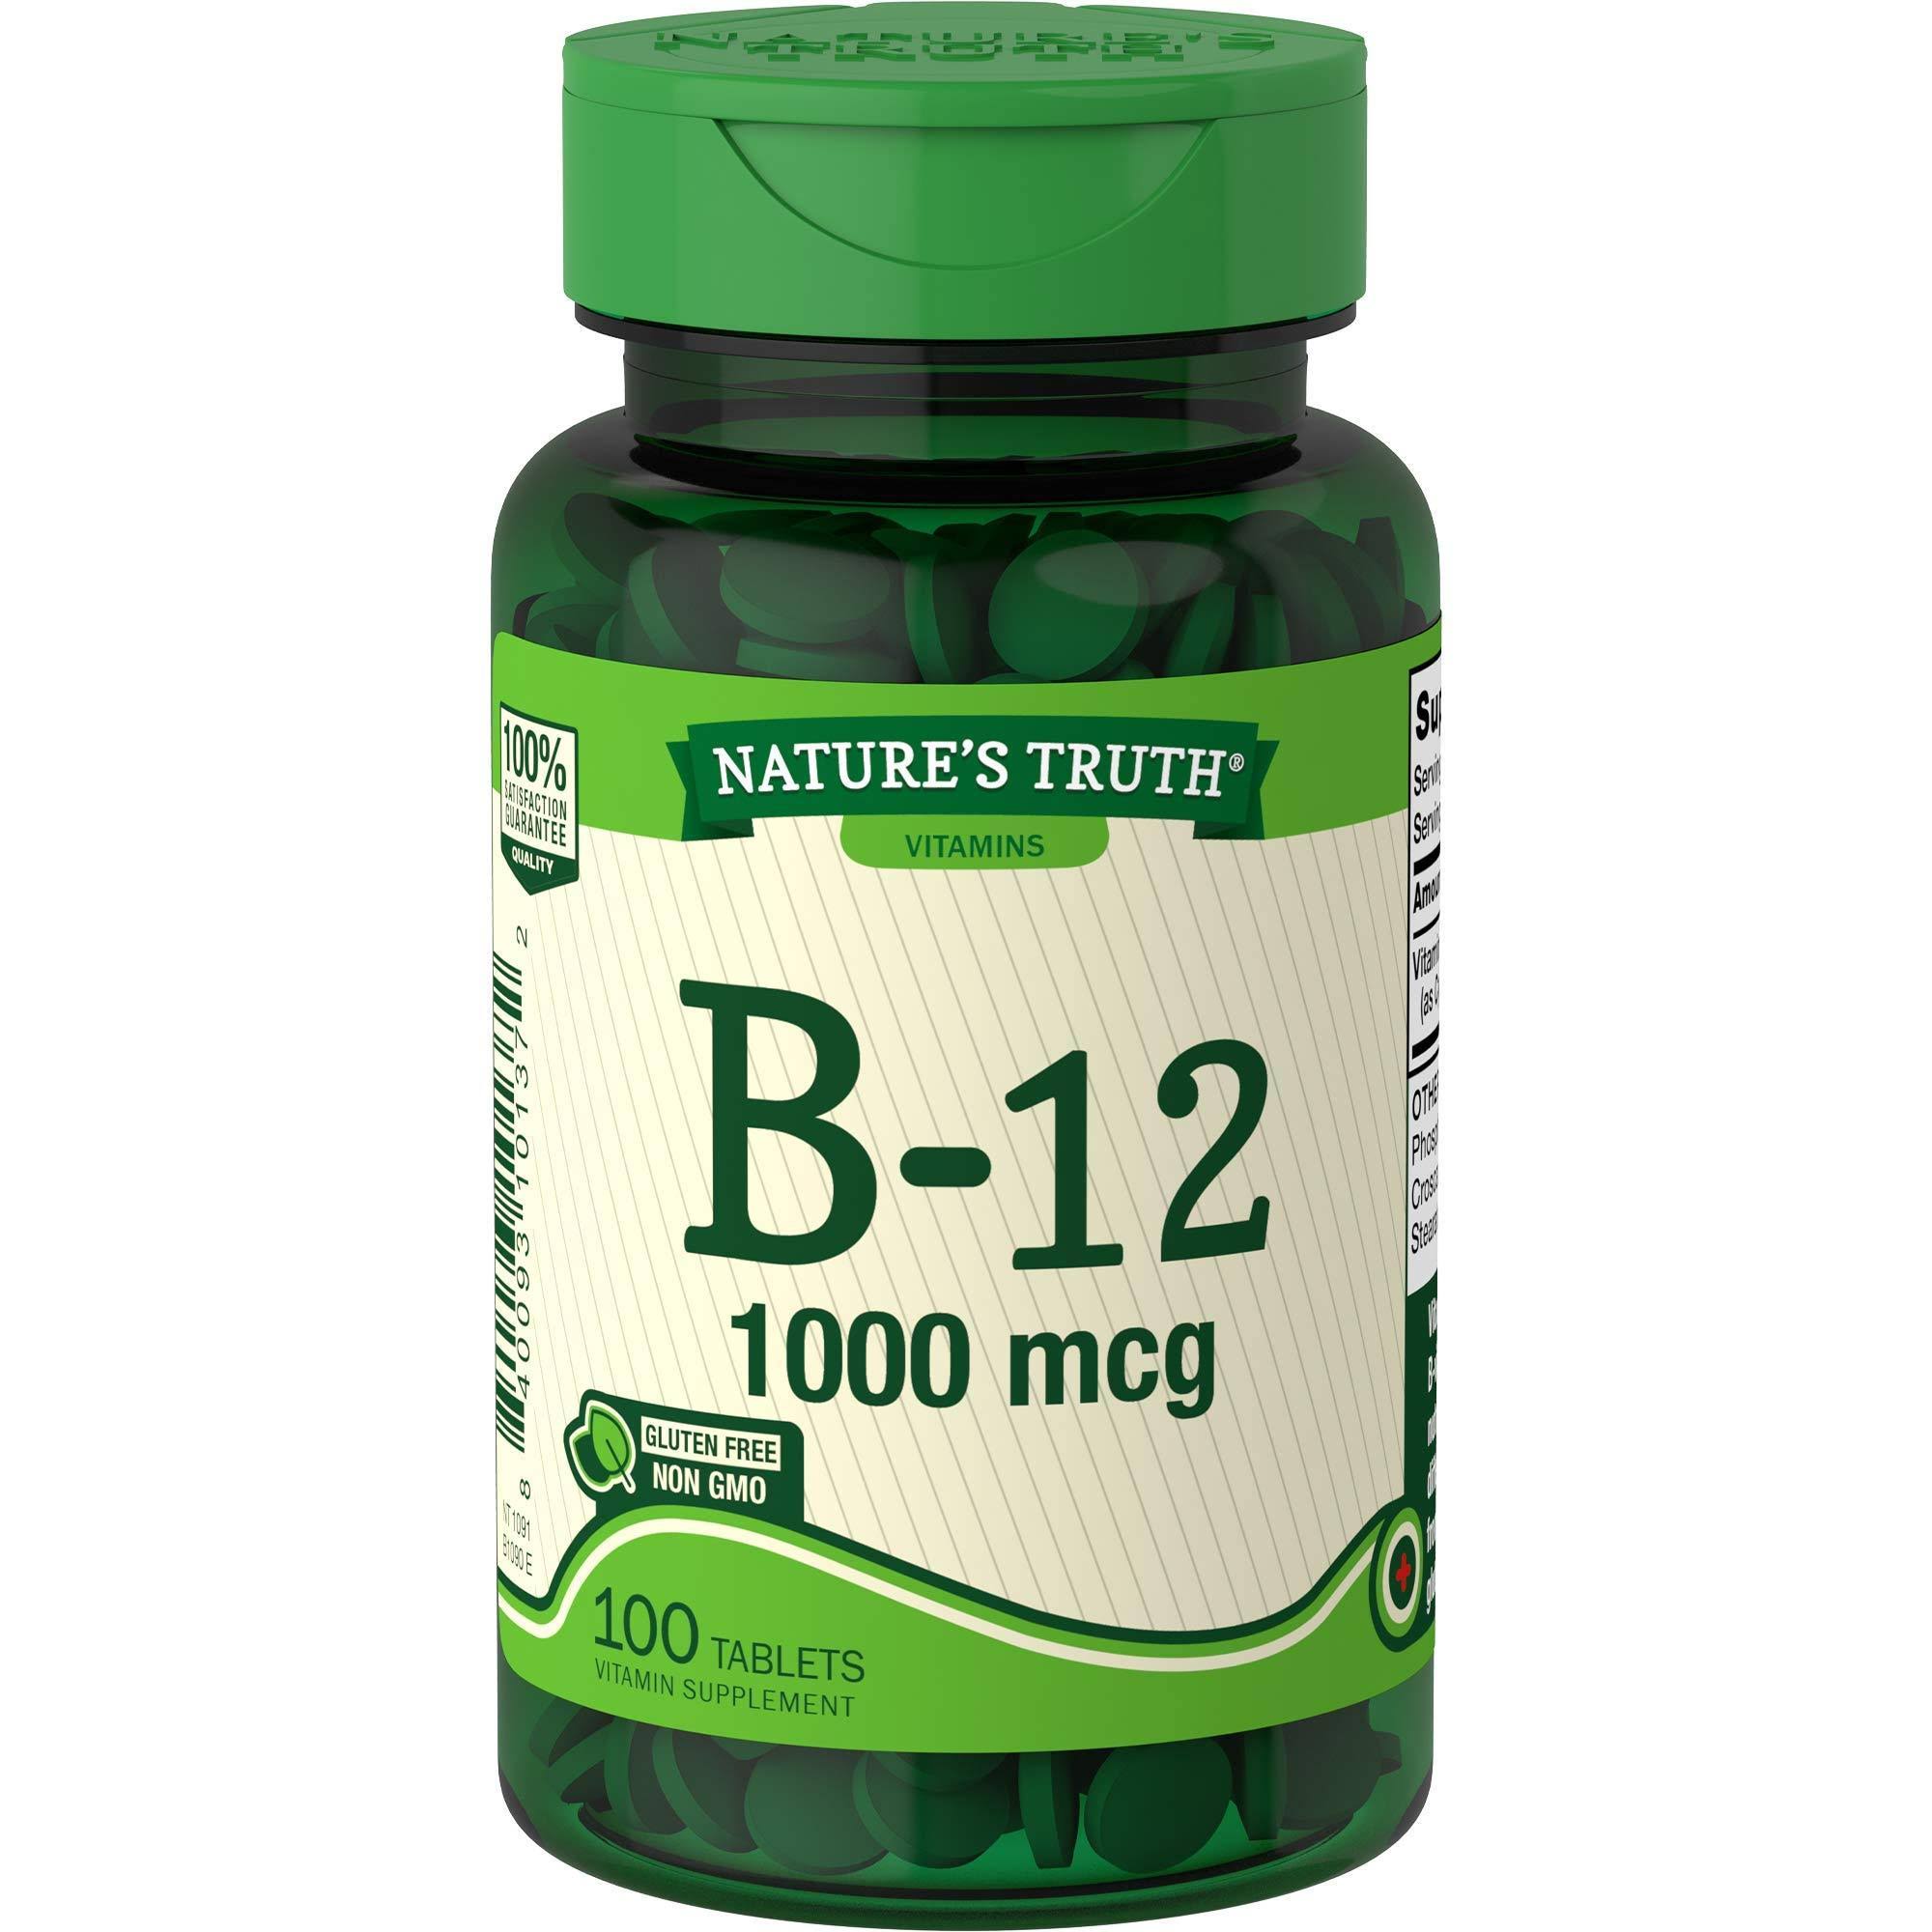 Nature's Truth B-12 1000 mcg - 100 Tablets